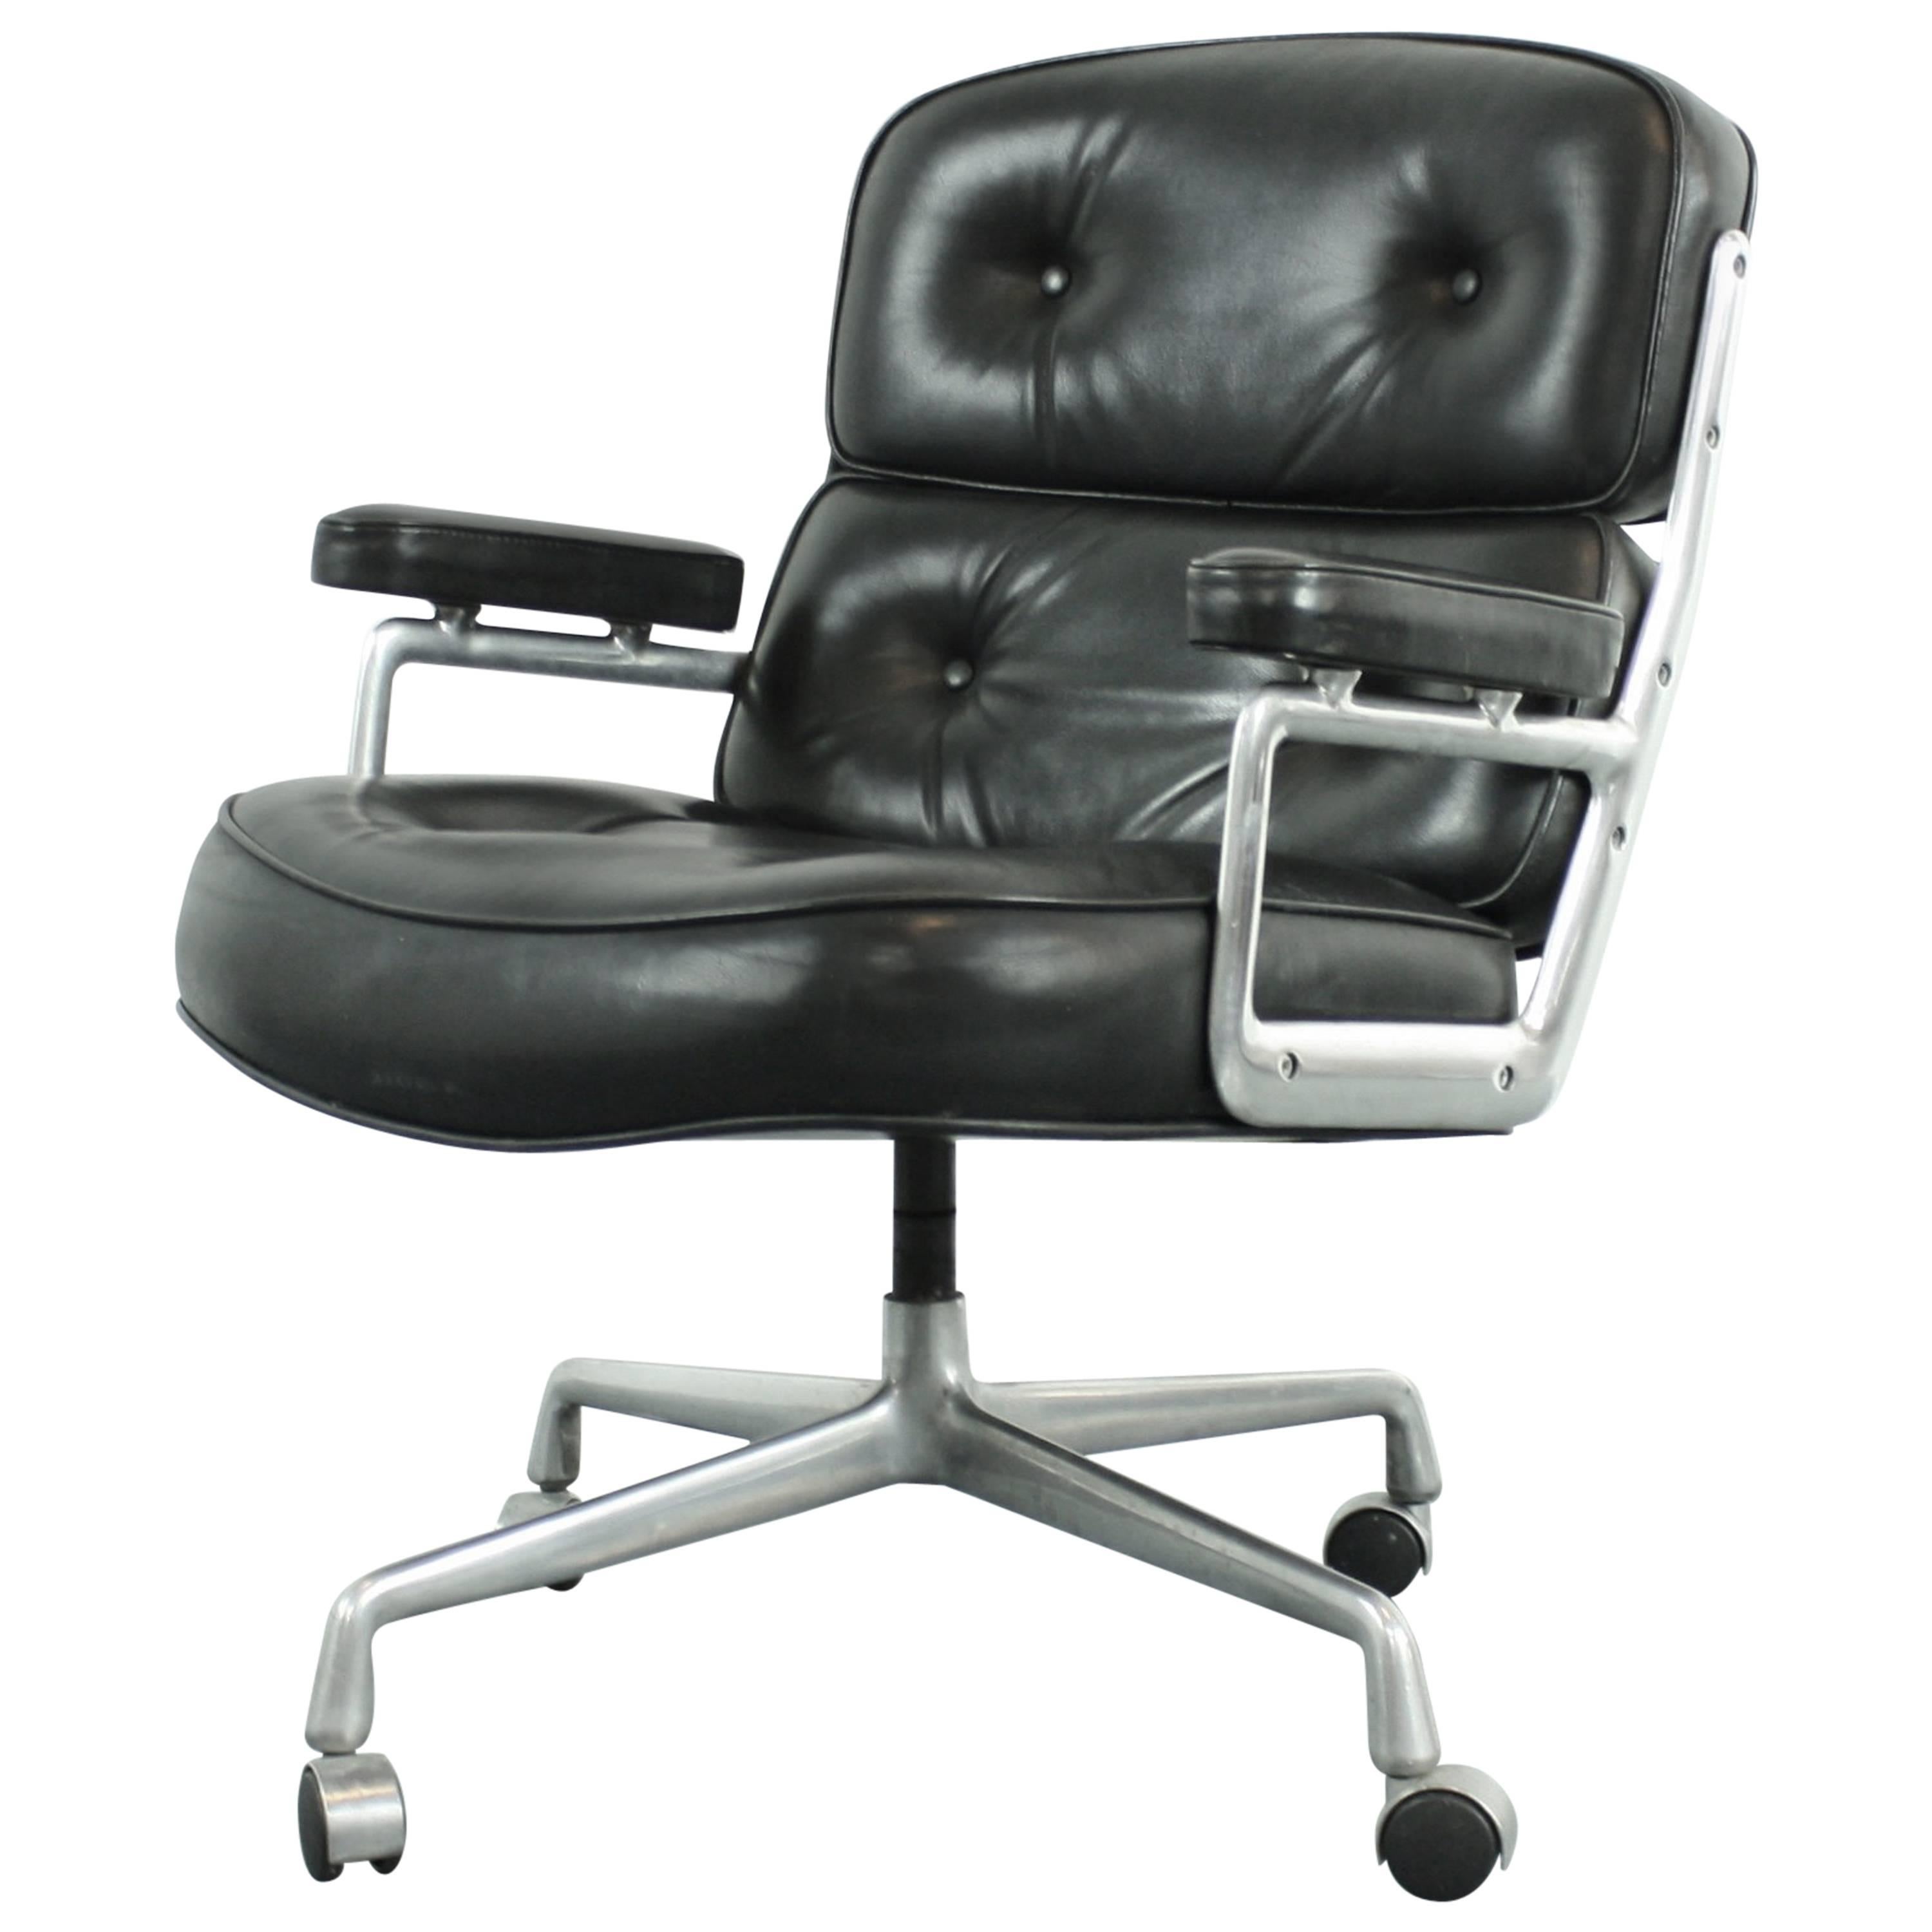 Vintage Midcentury Black Leather Time-Life Chair by Eames for Herman Miller For Sale